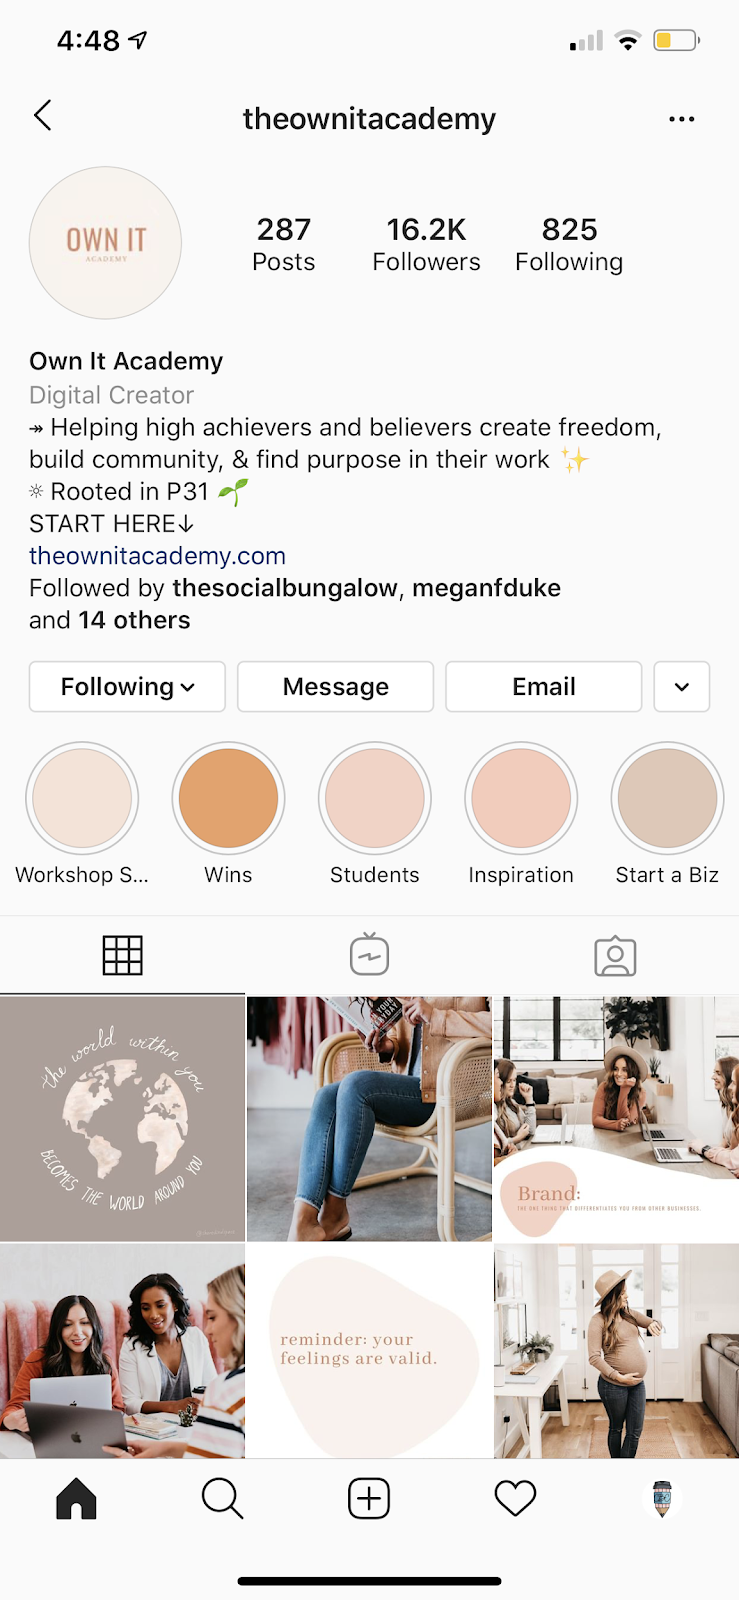 (Tips For Creating the Best Instagram Profile Possible)